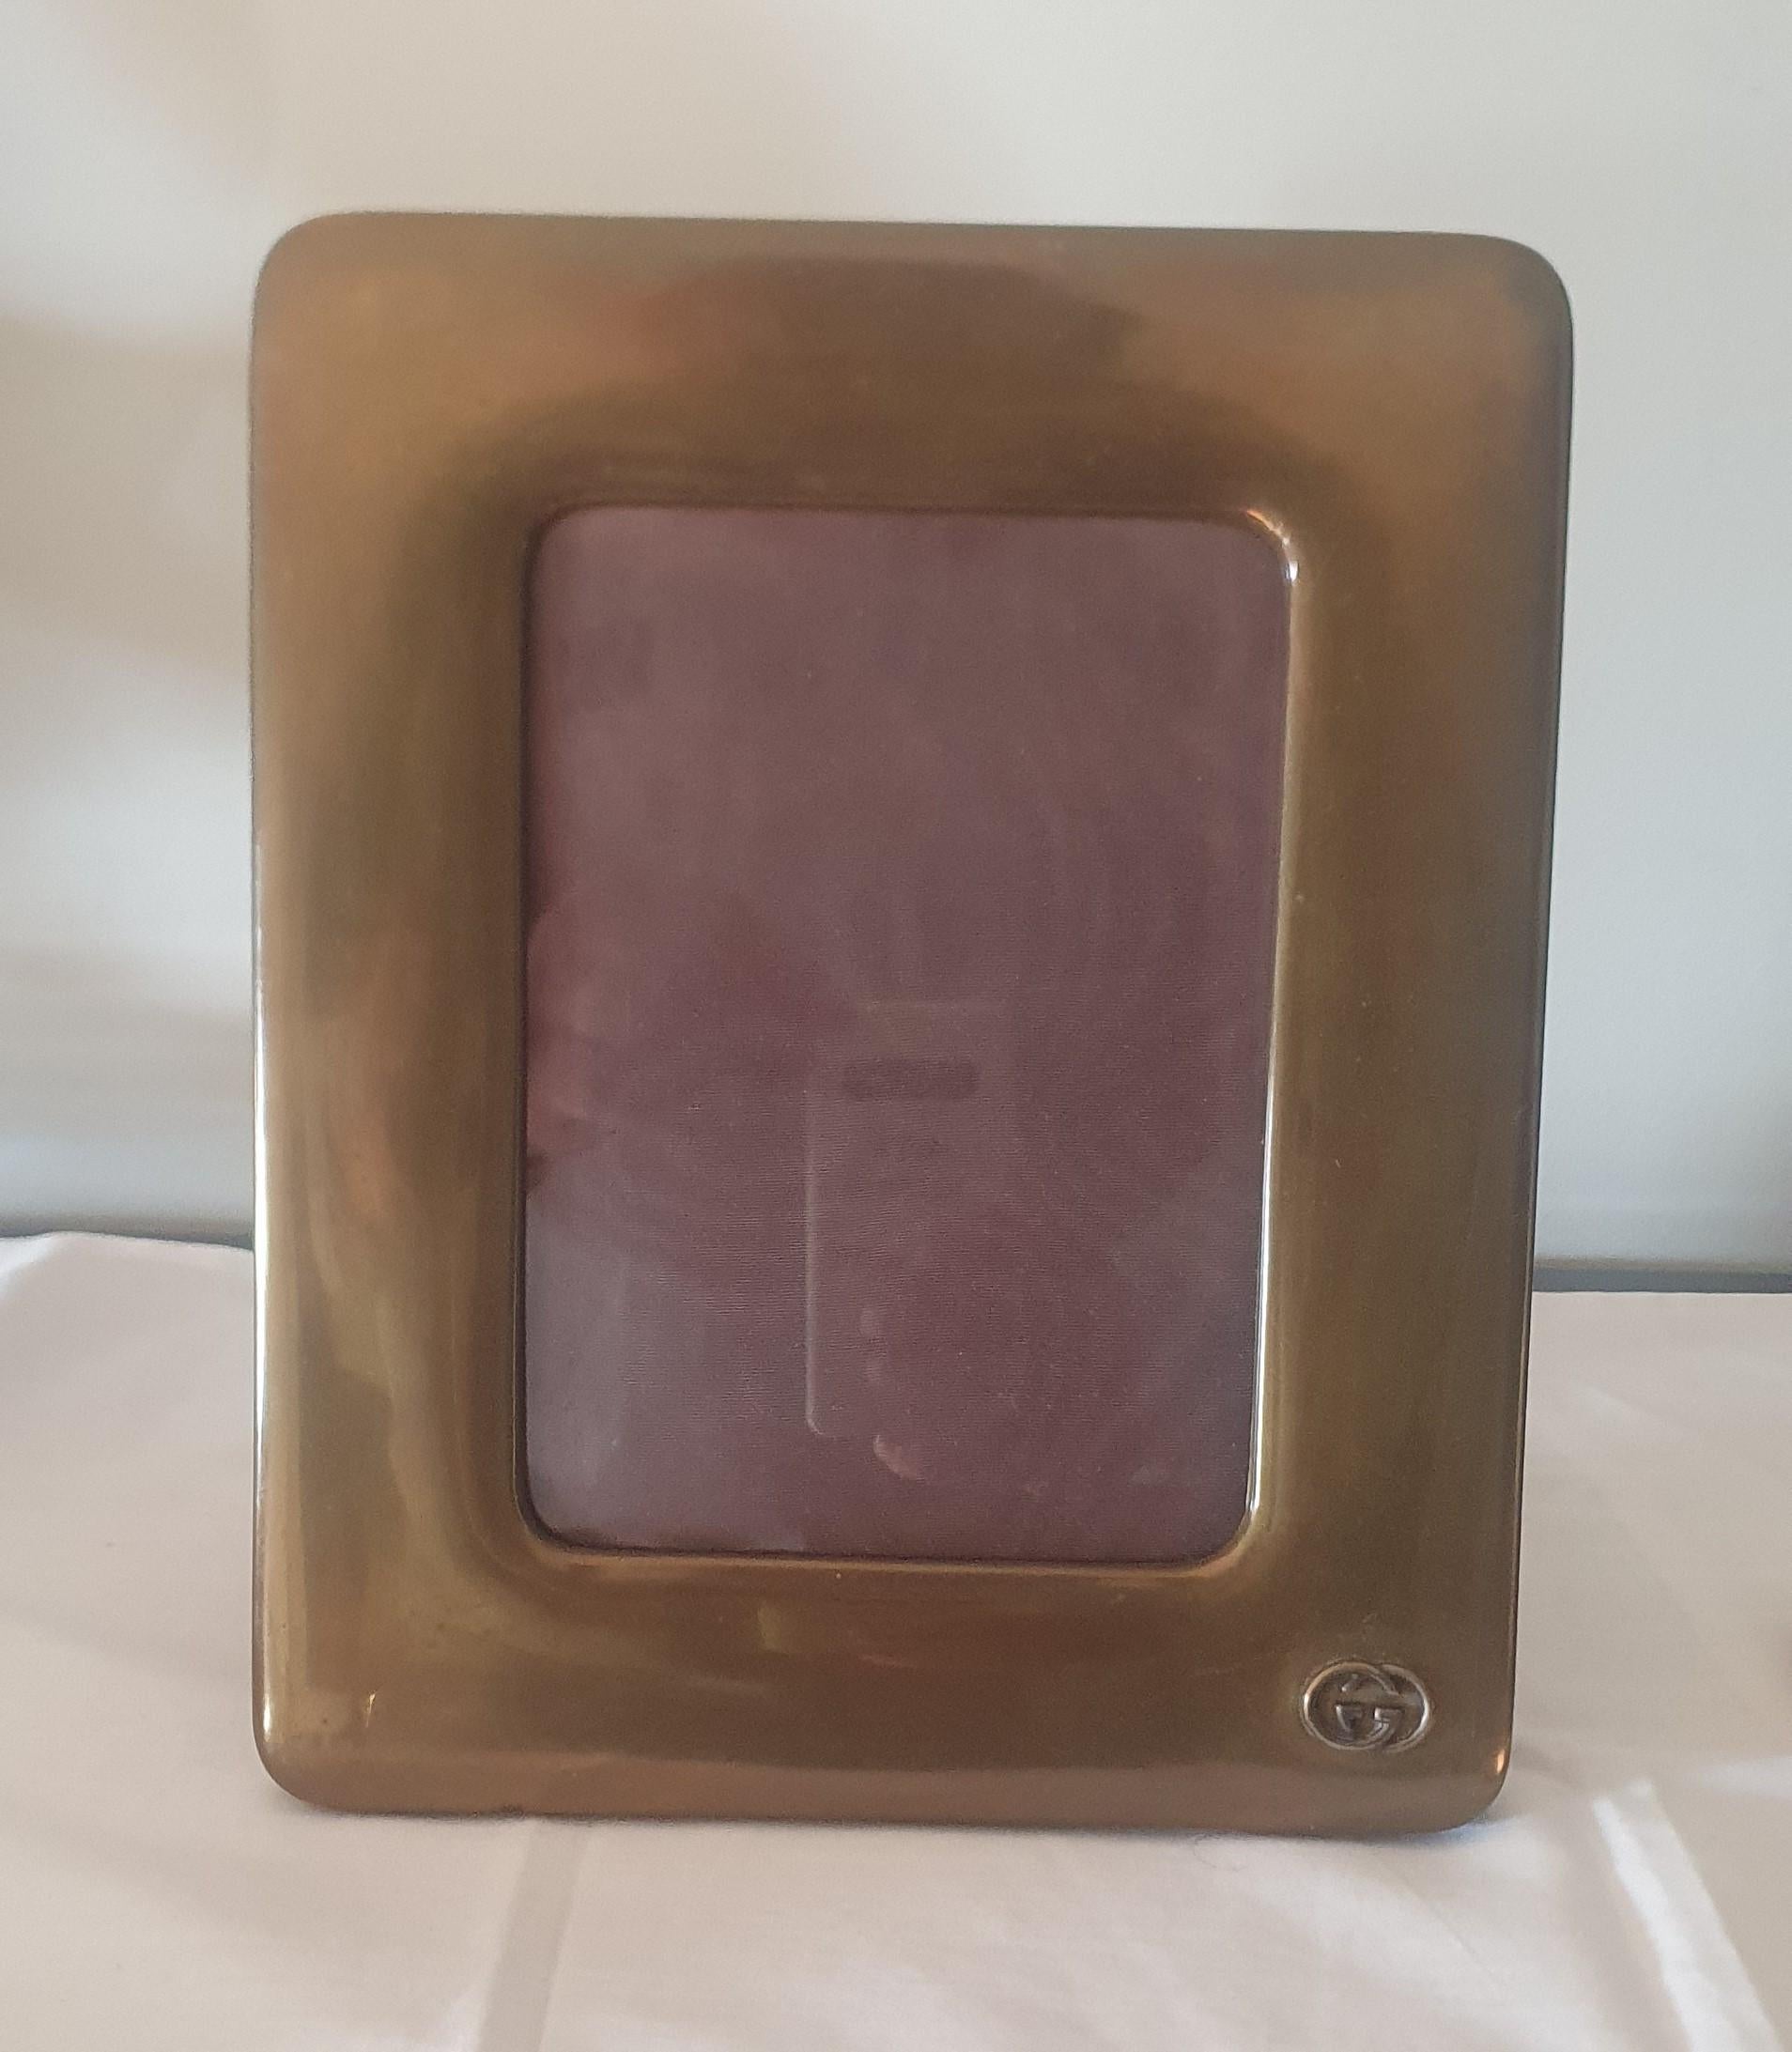 This is a beautifully thick luxurious photograph frame by the world renowned house of GUCCI

Made of Brass, it consists of a wide and deep cushioned effect moulded metal frame mounted on to a thick plush chocolate brown Velvet back with hinged leg